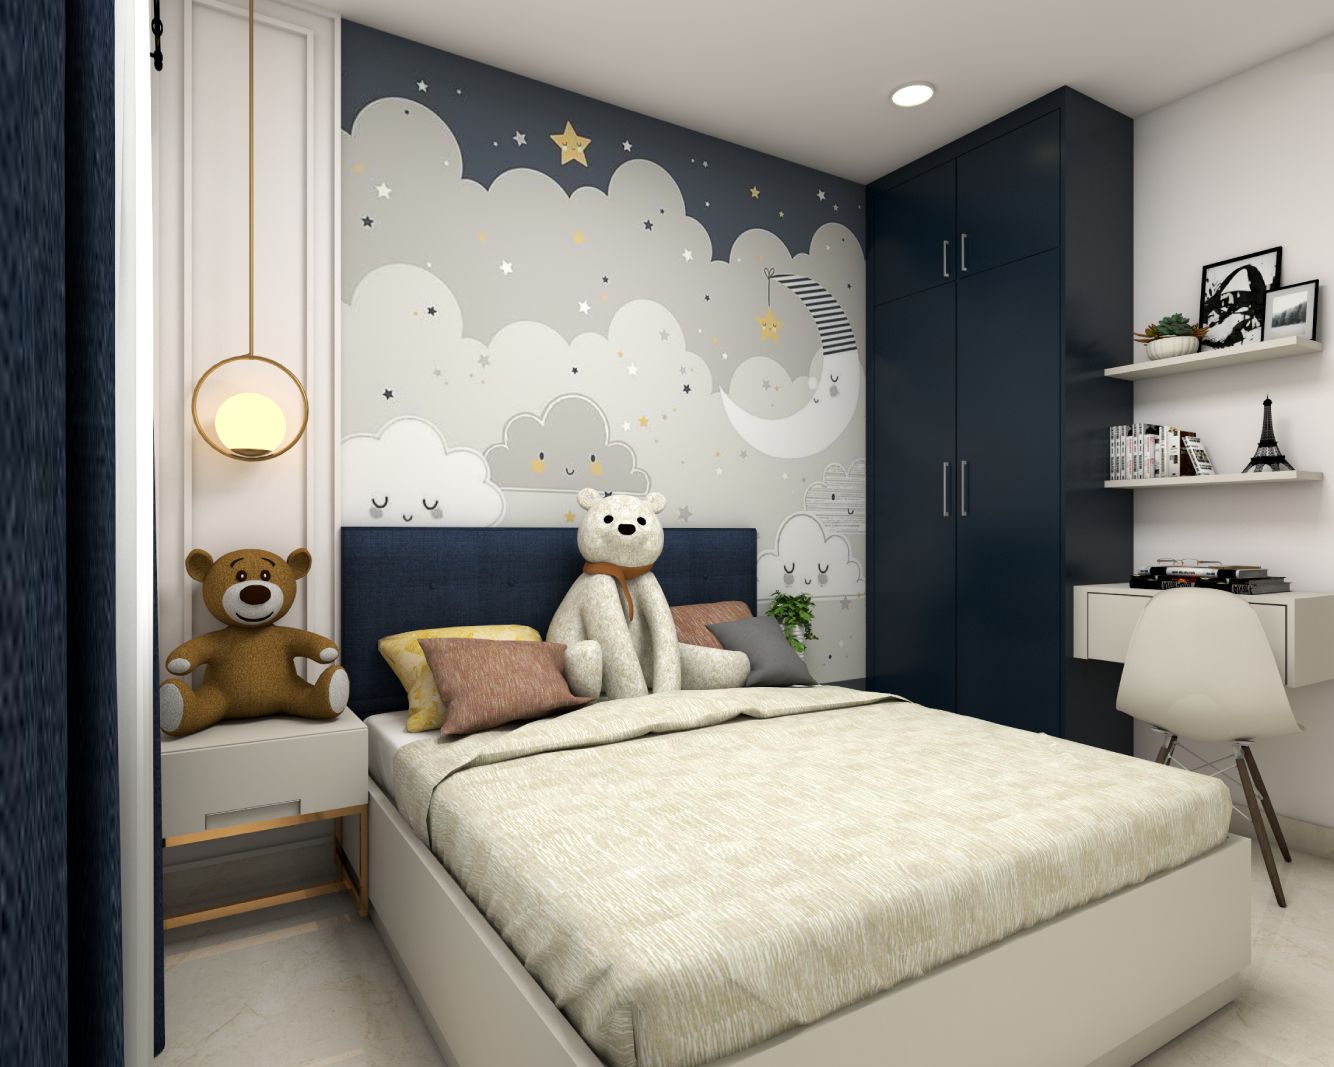 Modern Boys Room Design With Cloud-Themed Wallpaper